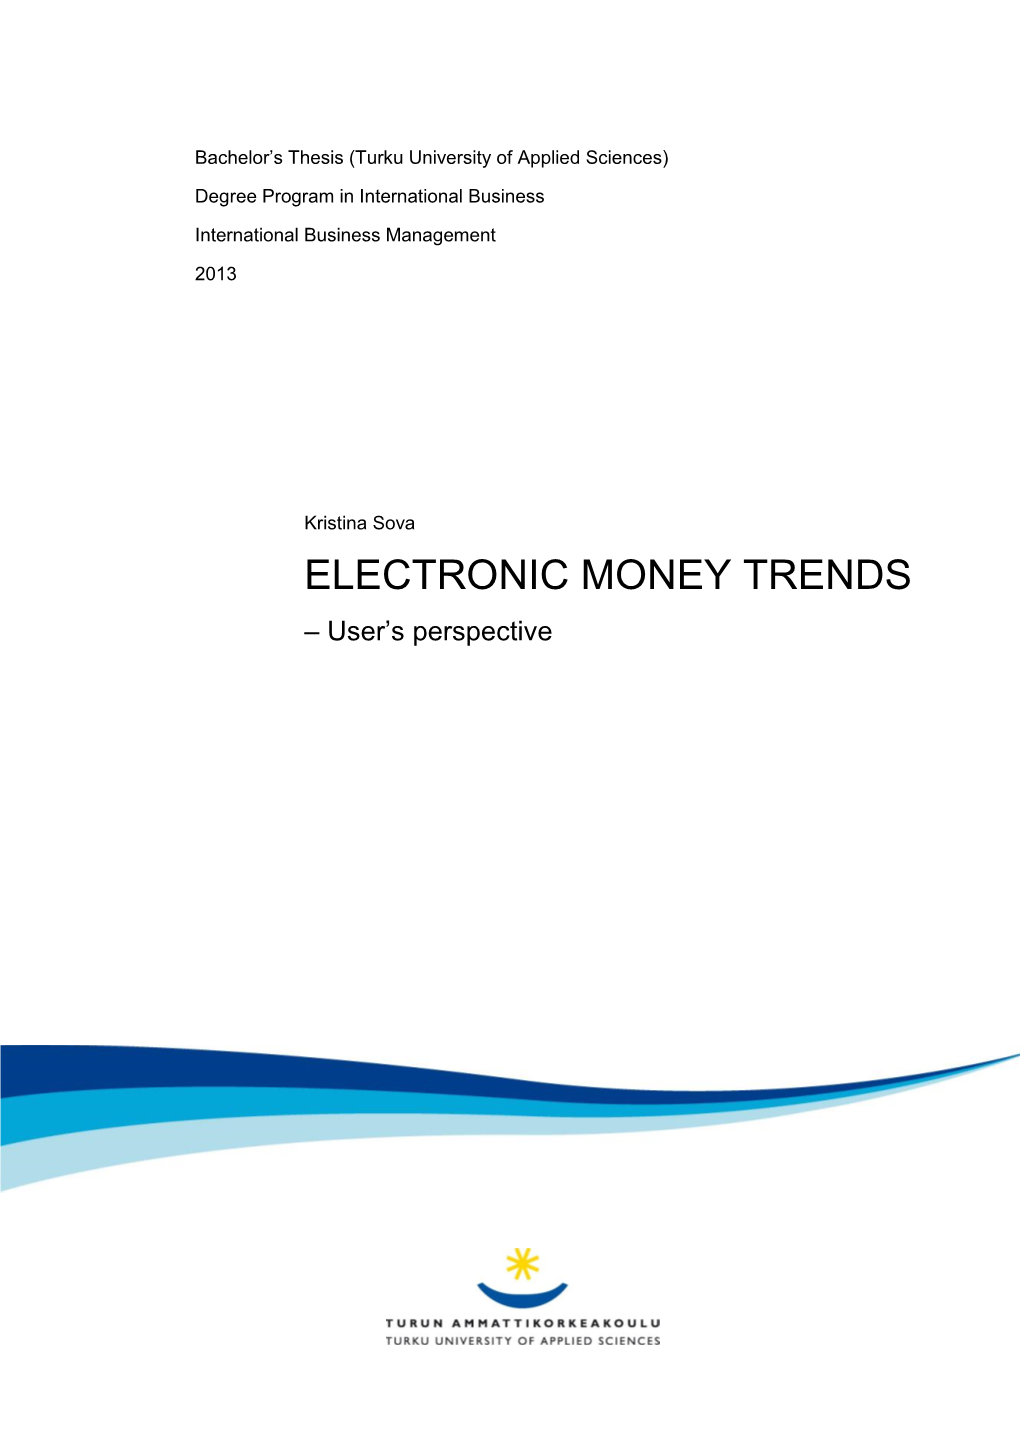 ELECTRONIC MONEY TRENDS – User’S Perspective